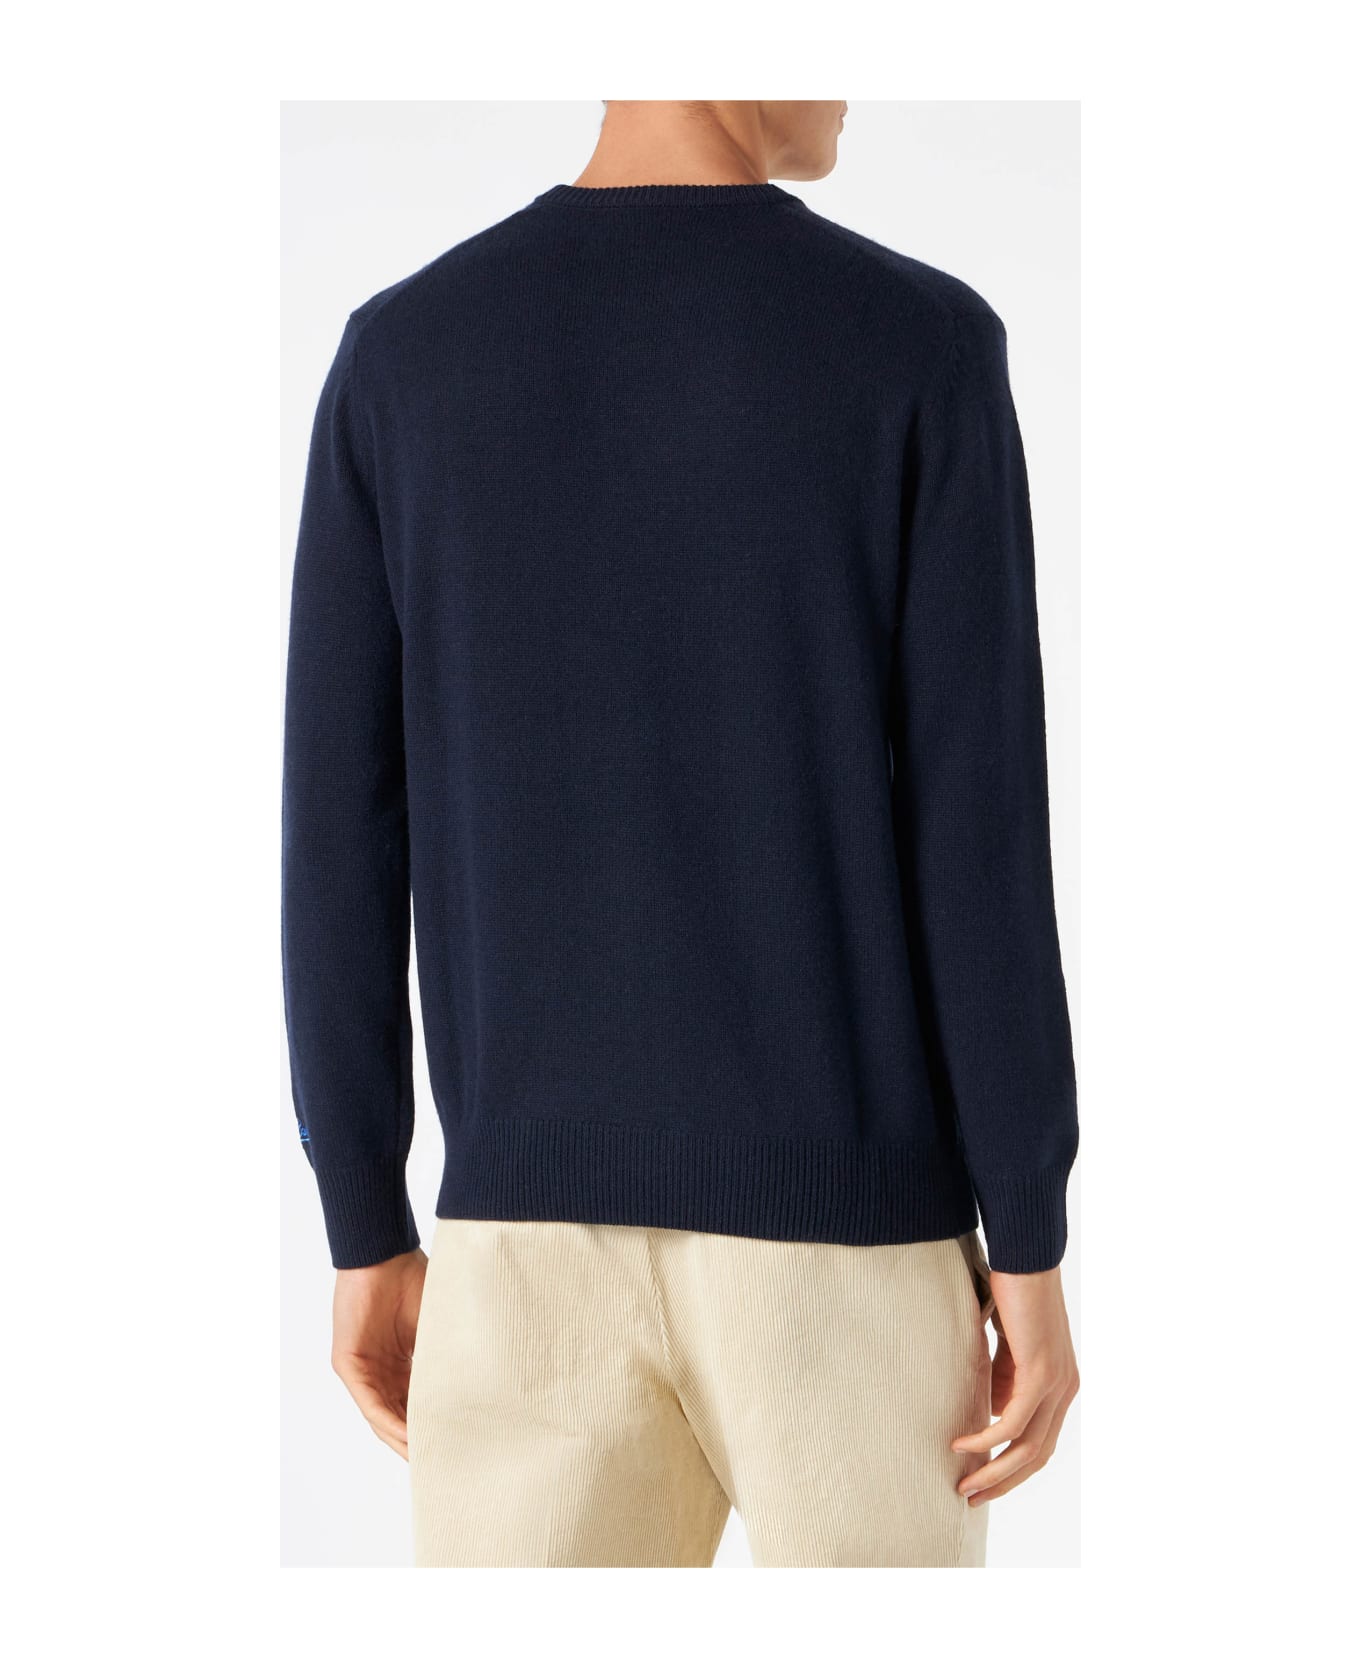 MC2 Saint Barth Man Navy Blue Sweater With Snoopy Print | Peanuts Special Edition - BLUE